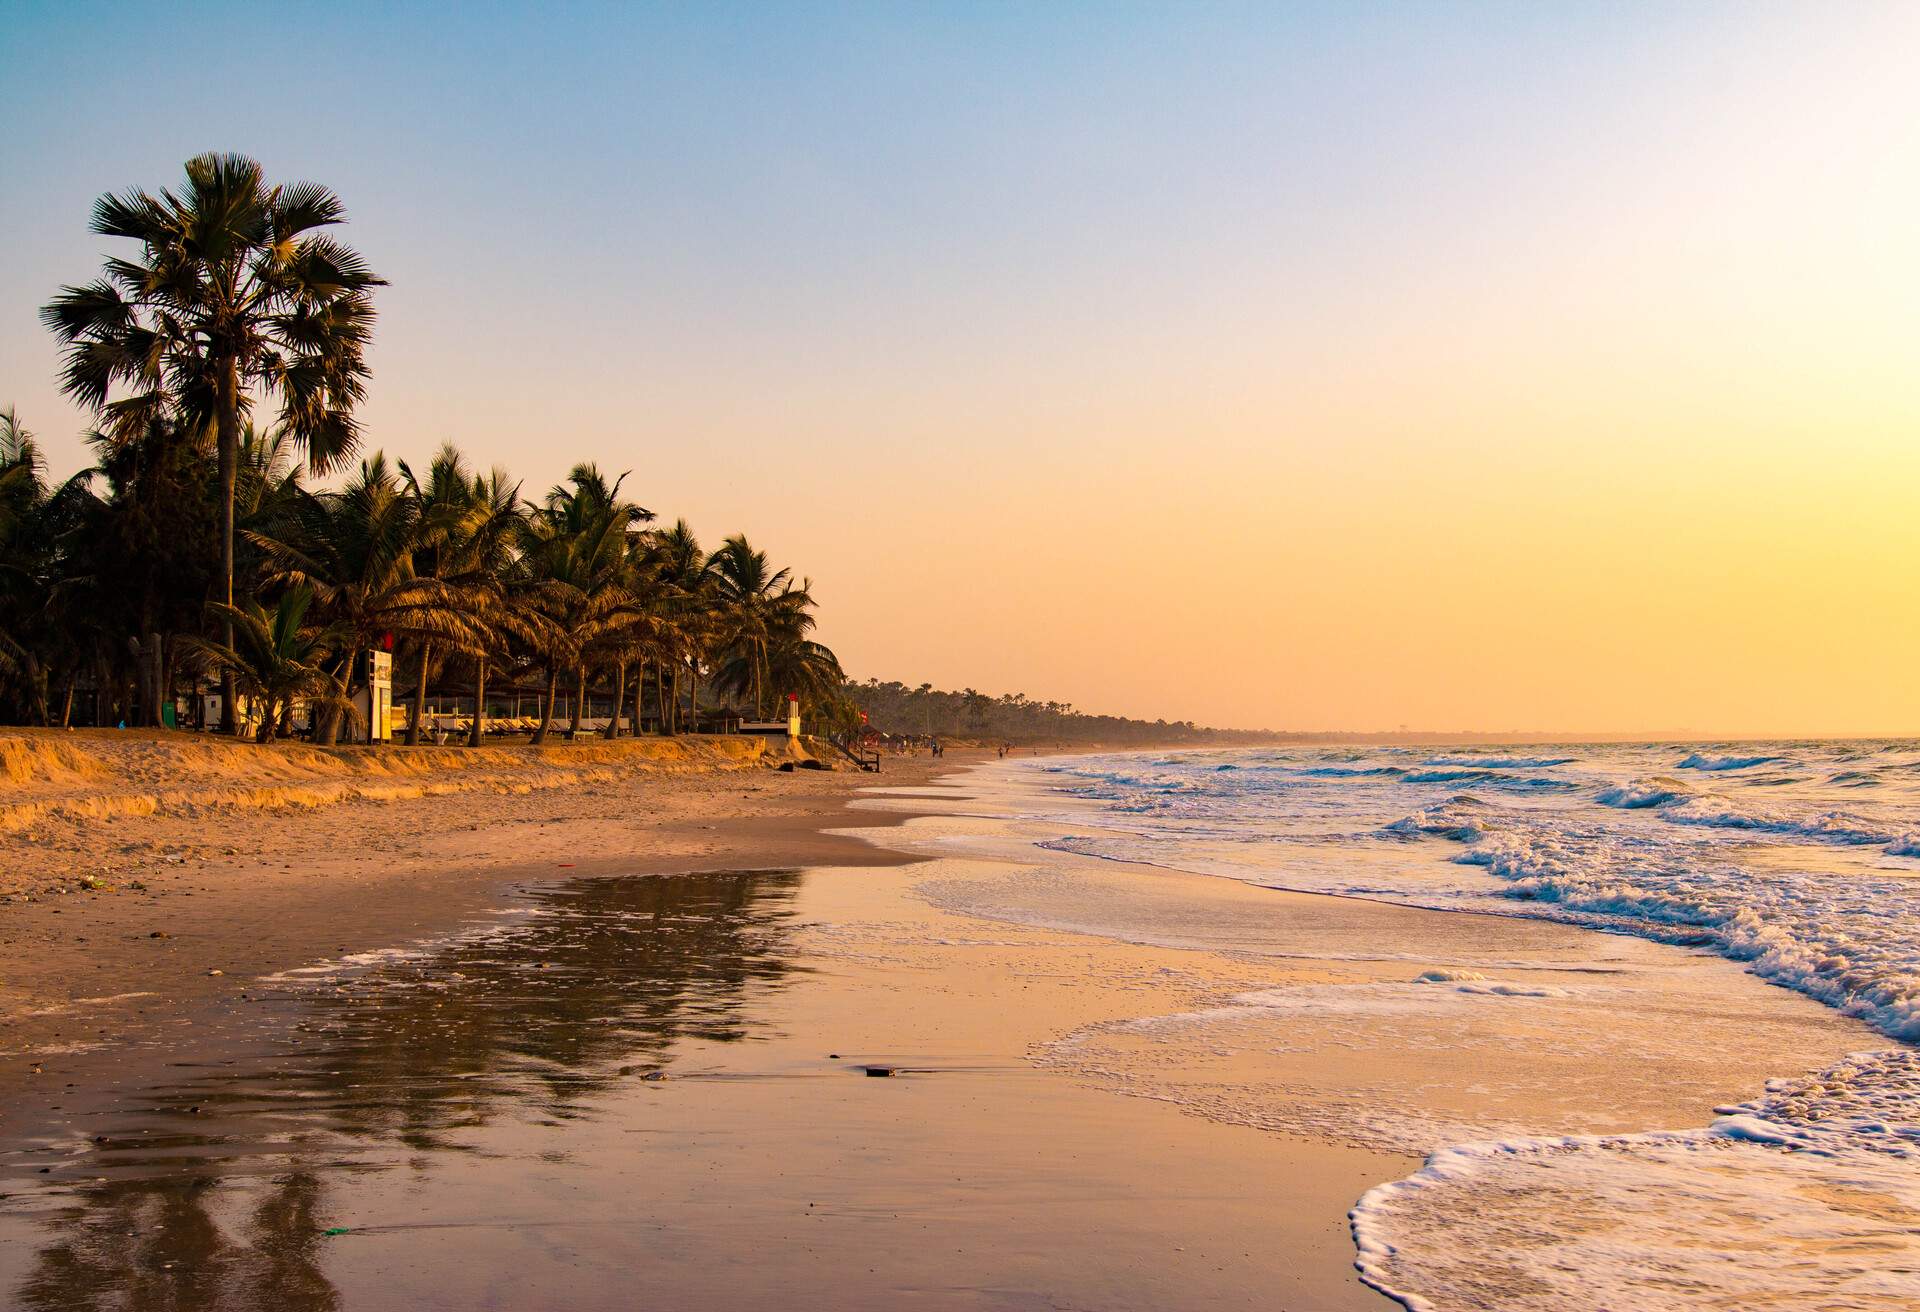 A wavy beach with a sandy shore lined with tall palm trees captured at sunset.